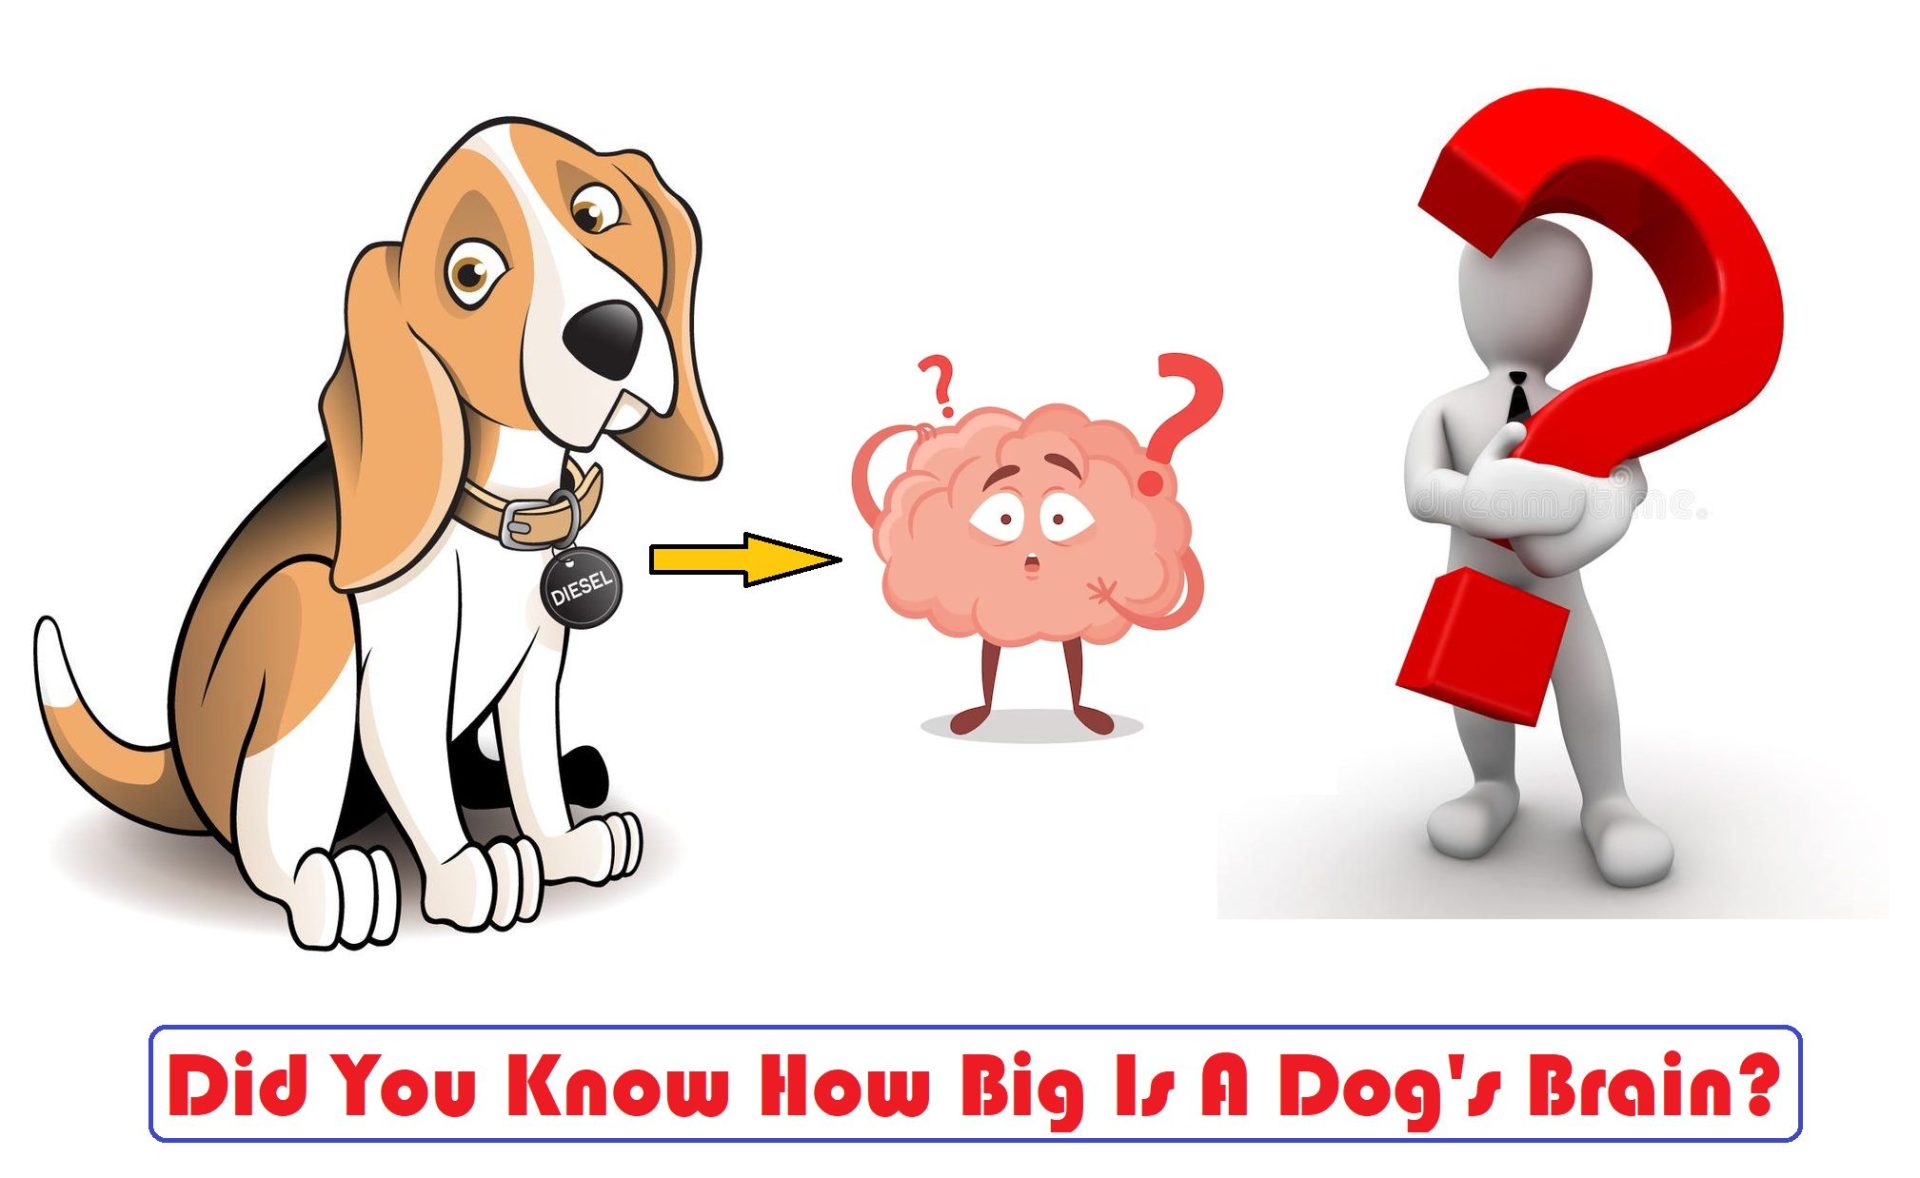 How Big Is A Dog’s Brain?